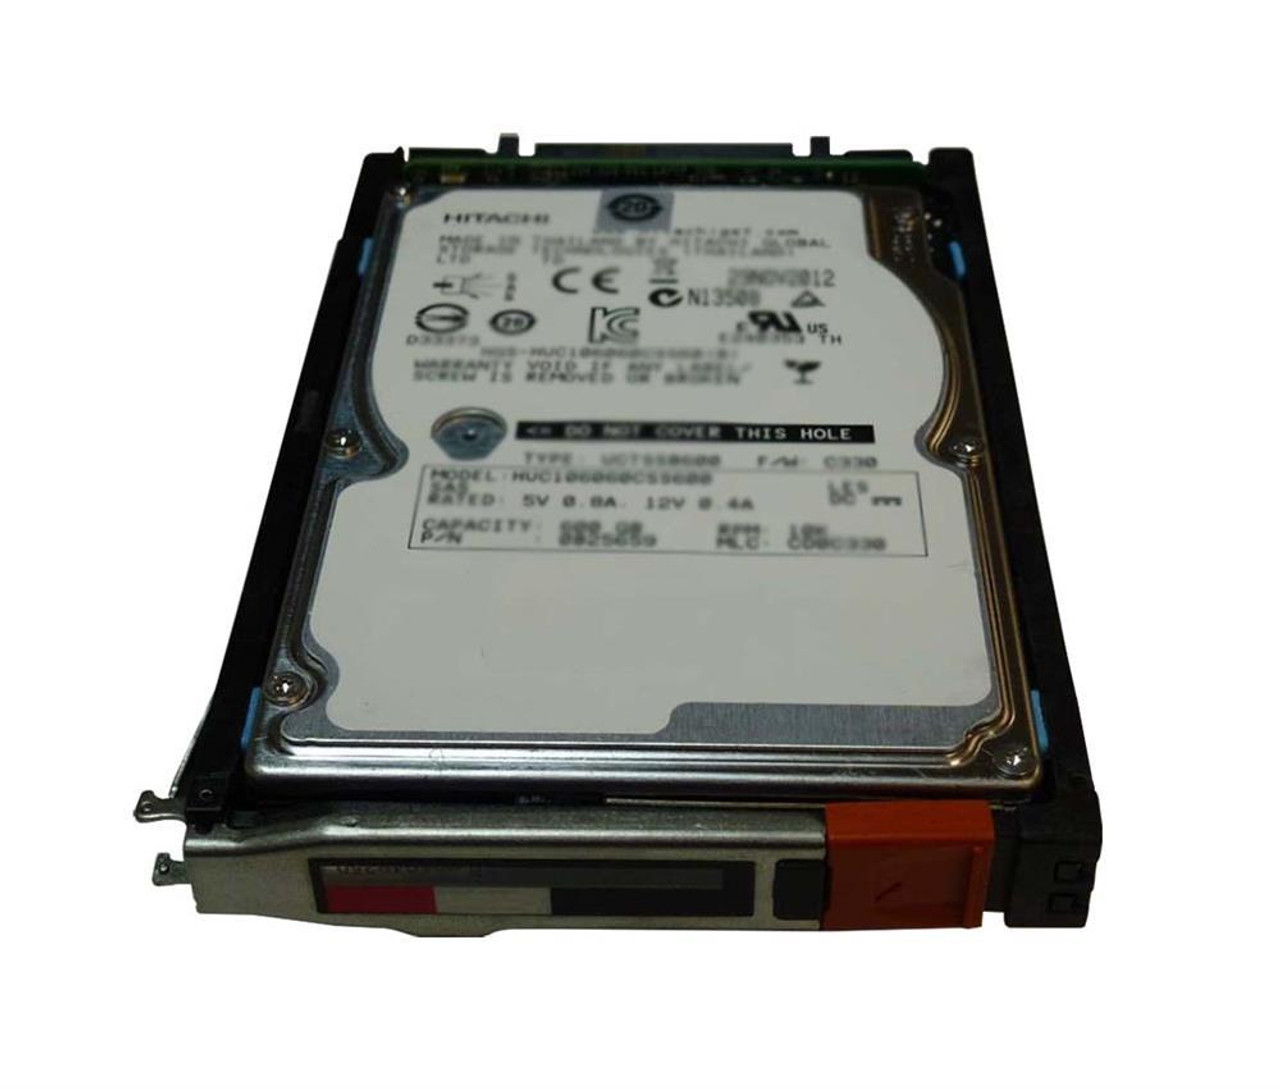 FLV42S6FX-200U EMC 200GB Fast Cache Flash 2.5-inch Internal Solid State Drive (SSD) for VNX 25 x 2.5 Enclosure